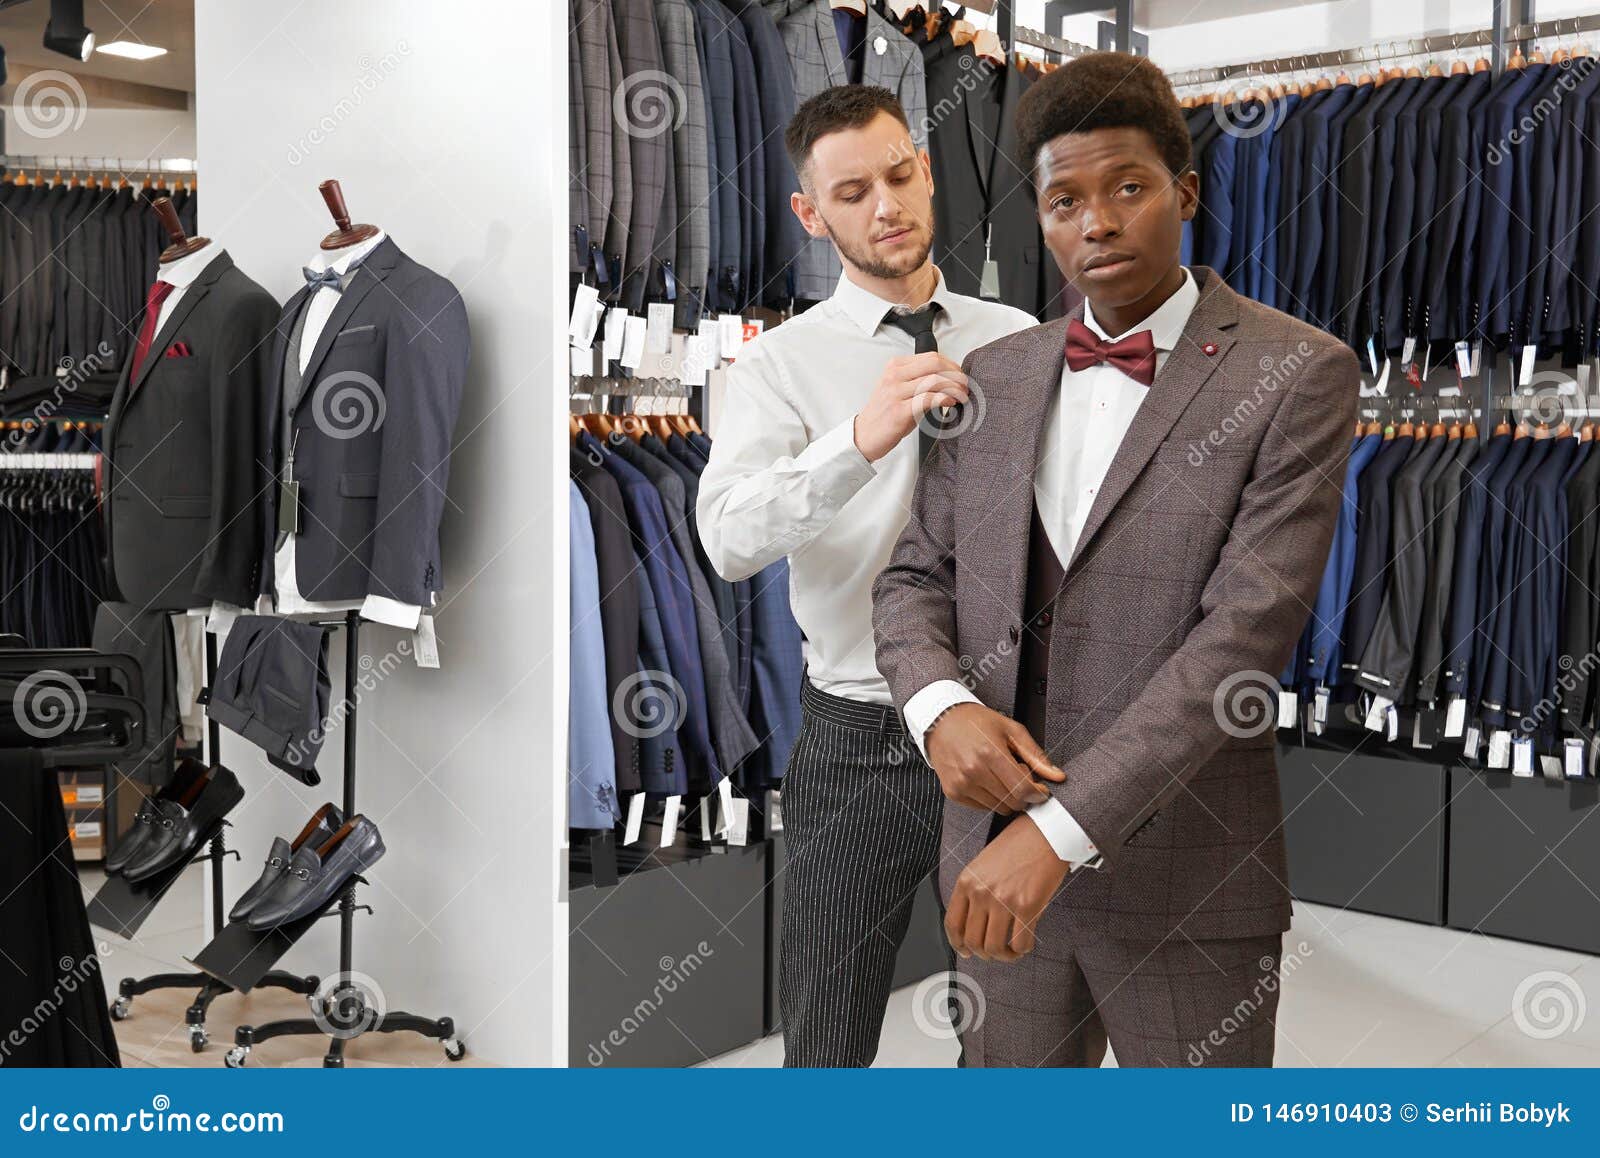 African Man in Boutique Trying on, Choosing Elegant Suit. Stock Image ...